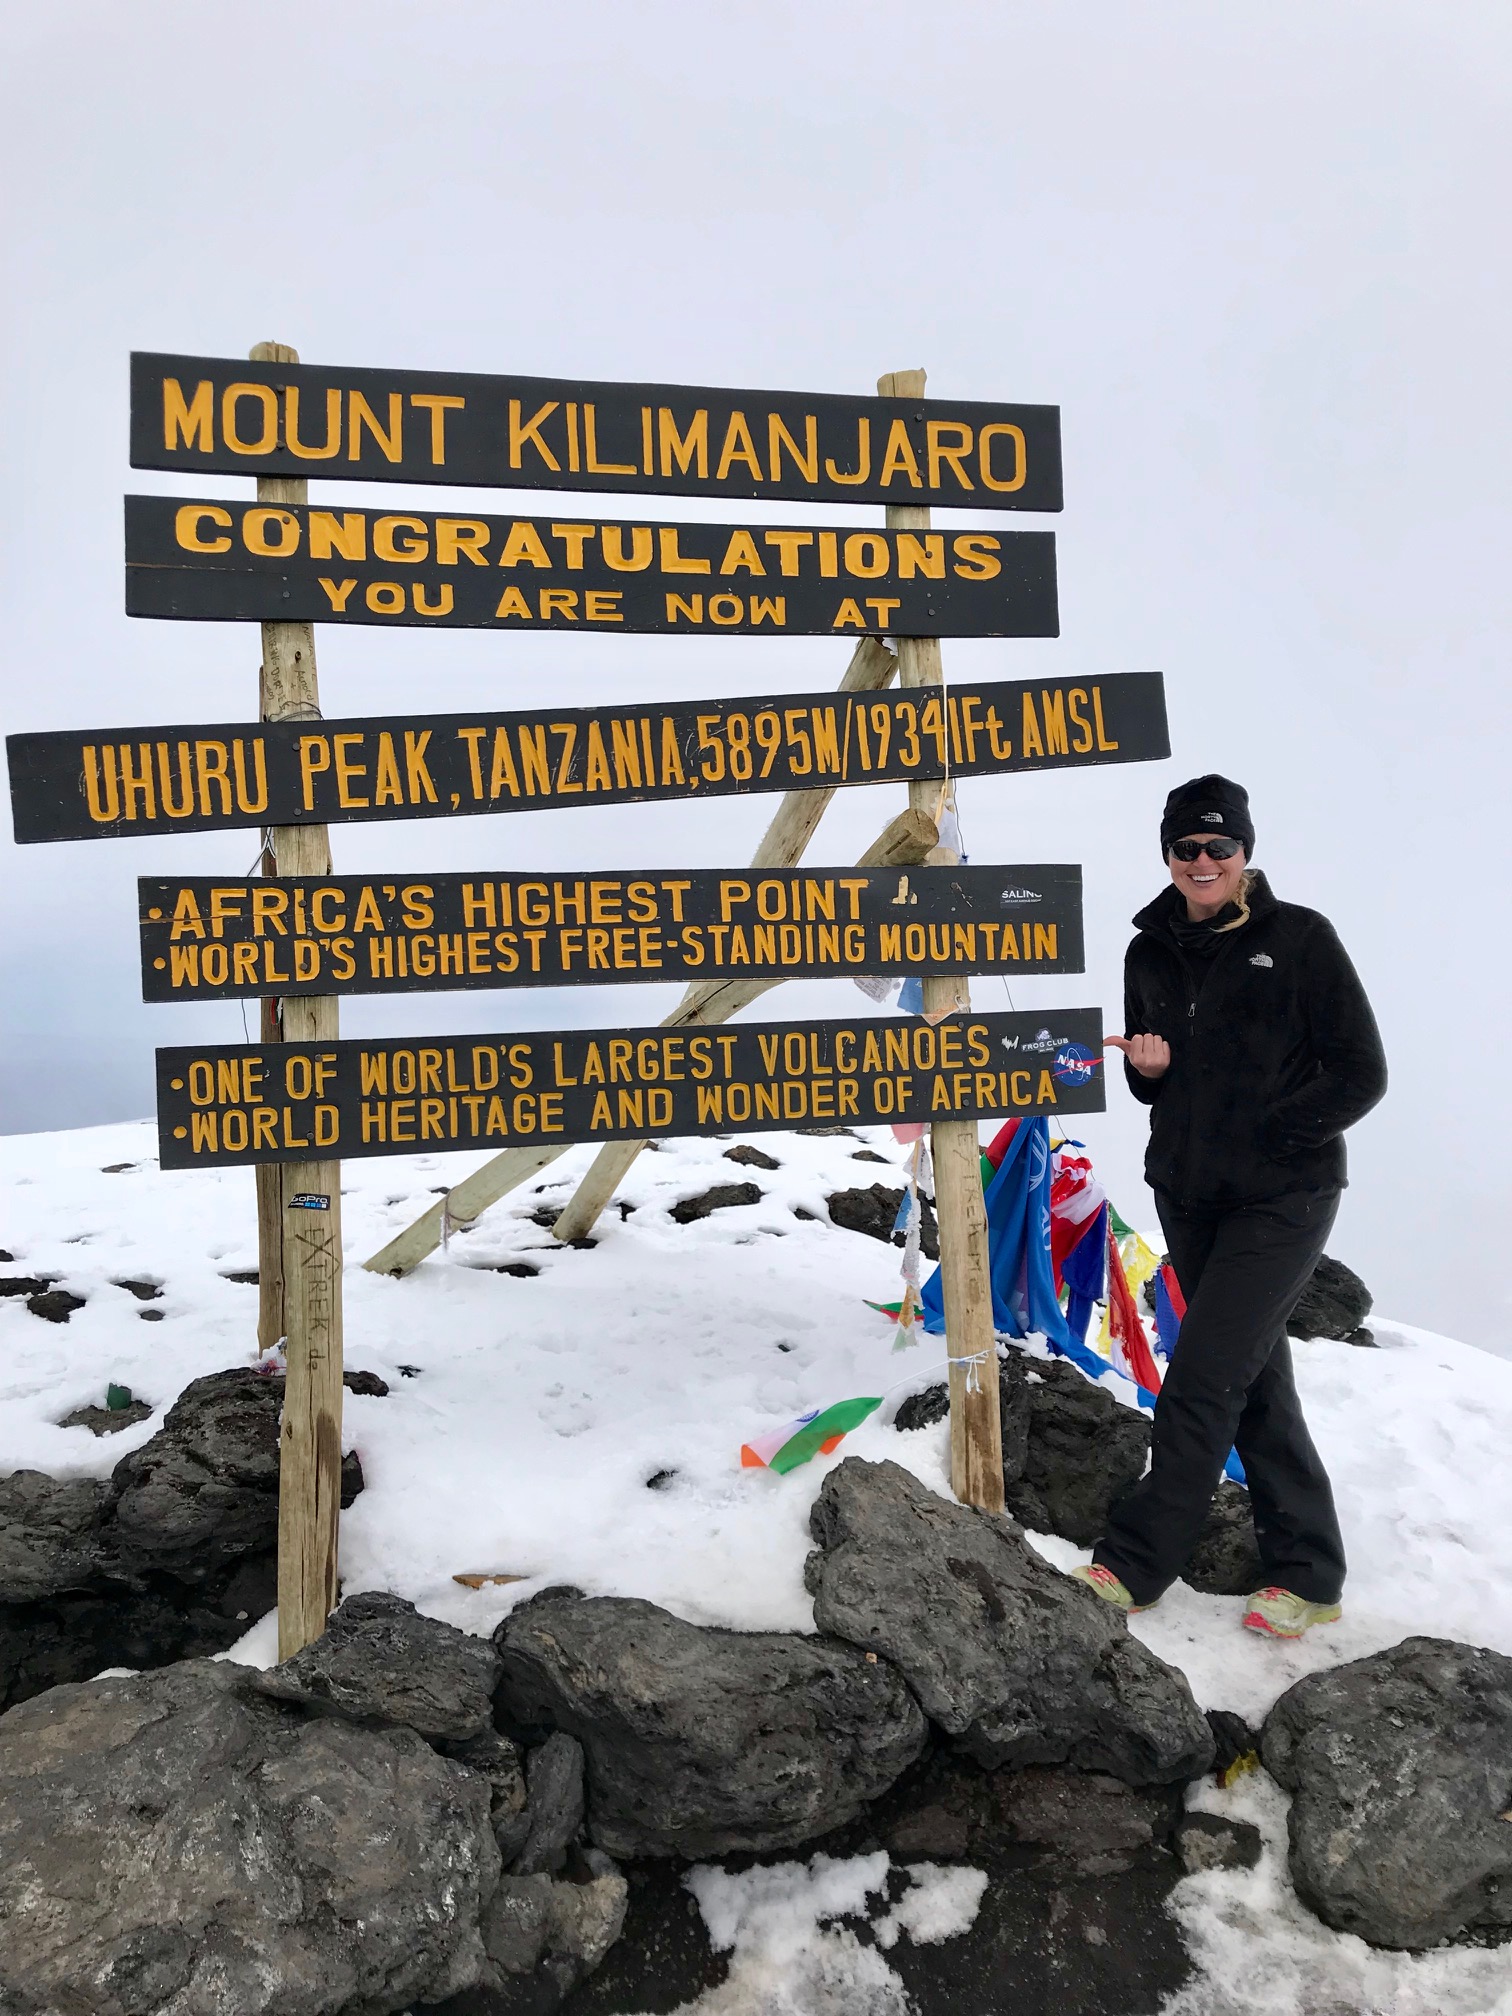 Woman with light skin wearing a black jacket, black pants, green and pink tennis shoes, a black beanie, and sunglasses stands on snow-covered rocks, smiling and pointing at a sign with the words "Mount Kilimanjaro, Congratulations you are now at, Uhuru Peak, Tanzania, 5895M/19341 ft AMSL, Africa's highest point, World's highest free-standing mountain, one of the largest volcanos, world heritage, and wonder of Africa.